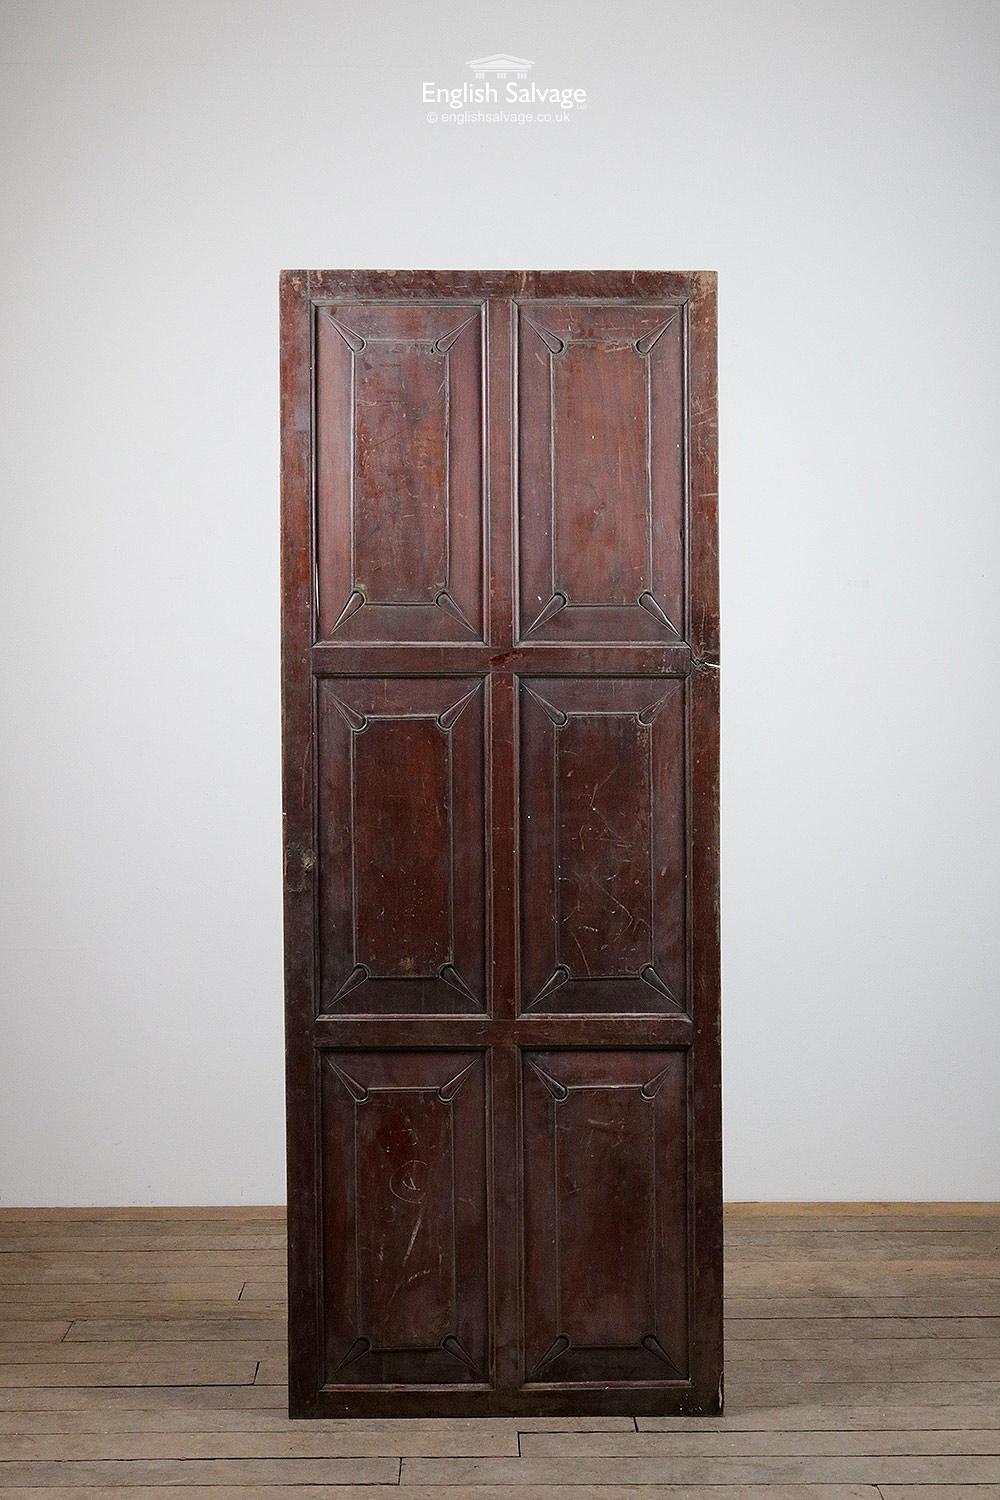 Large sized attractive four panel hardwood cupboard door / panel. Probably teak or a similar red hardwood. Unusual and ornate carving to the front panels on the front face, plain panels to the rear. This has been varnished, which is worn in places.